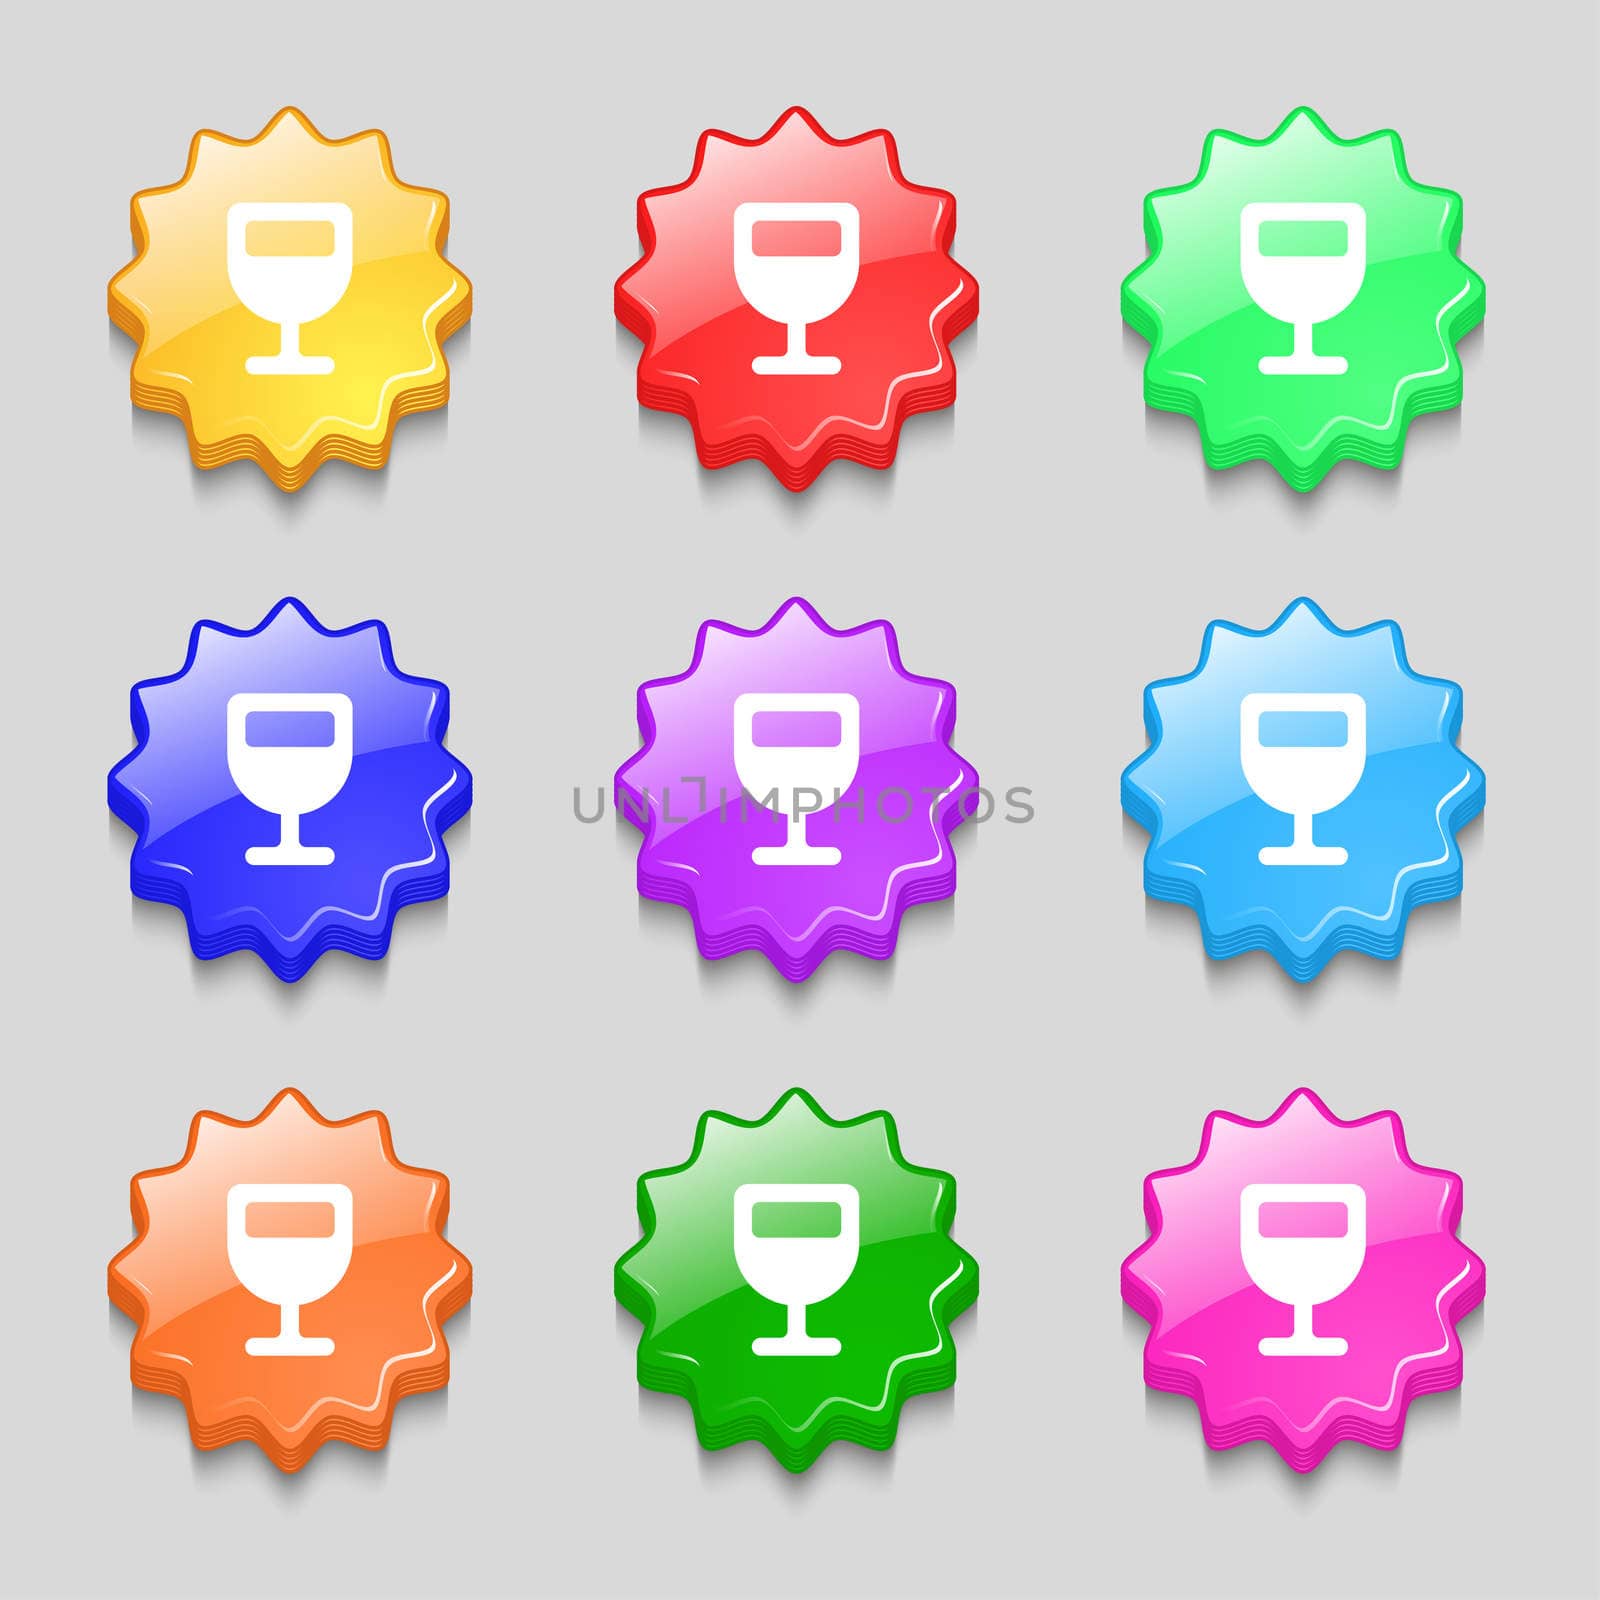 Wine glass, Alcohol drink icon sign. symbol on nine wavy colourful buttons. illustration